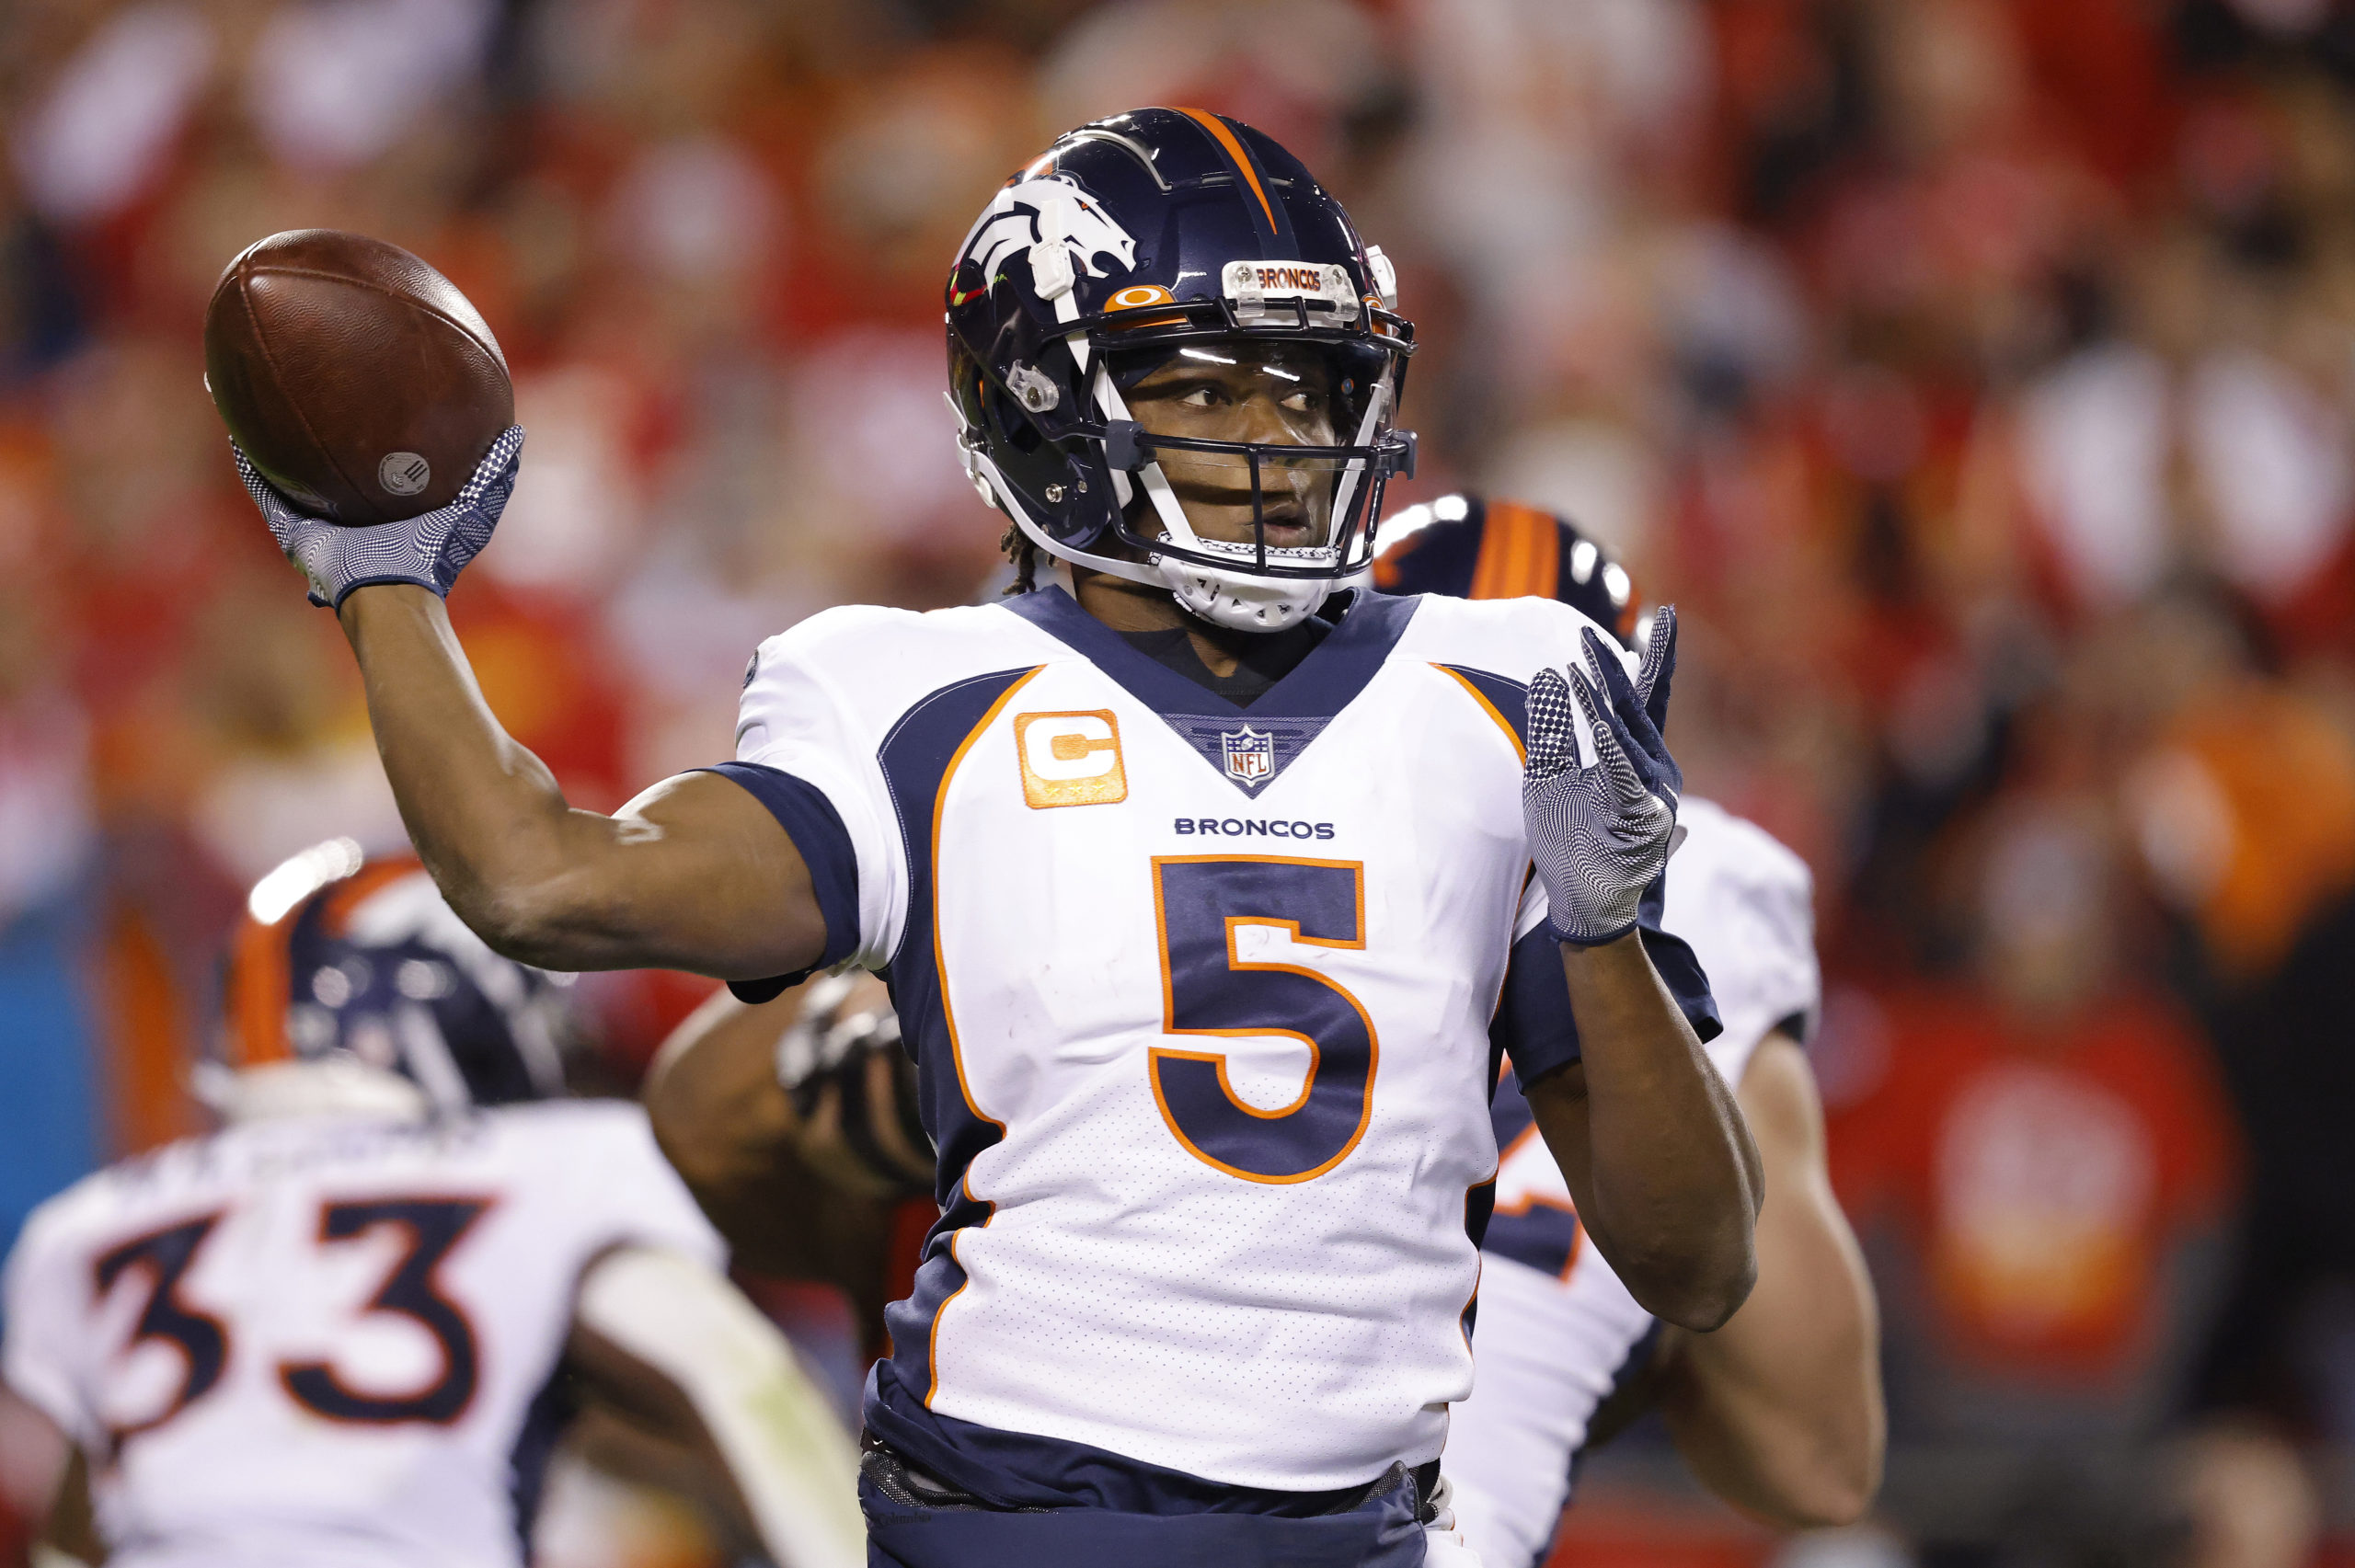 KANSAS CITY, MISSOURI - DECEMBER 05: Teddy Bridgewater #5 of the Denver Broncos throws against the Kansas City Chiefs  during the second half at Arrowhead Stadium on December 05, 2021 in Kansas City, Missouri. (Photo by David Eulitt/Getty Images)